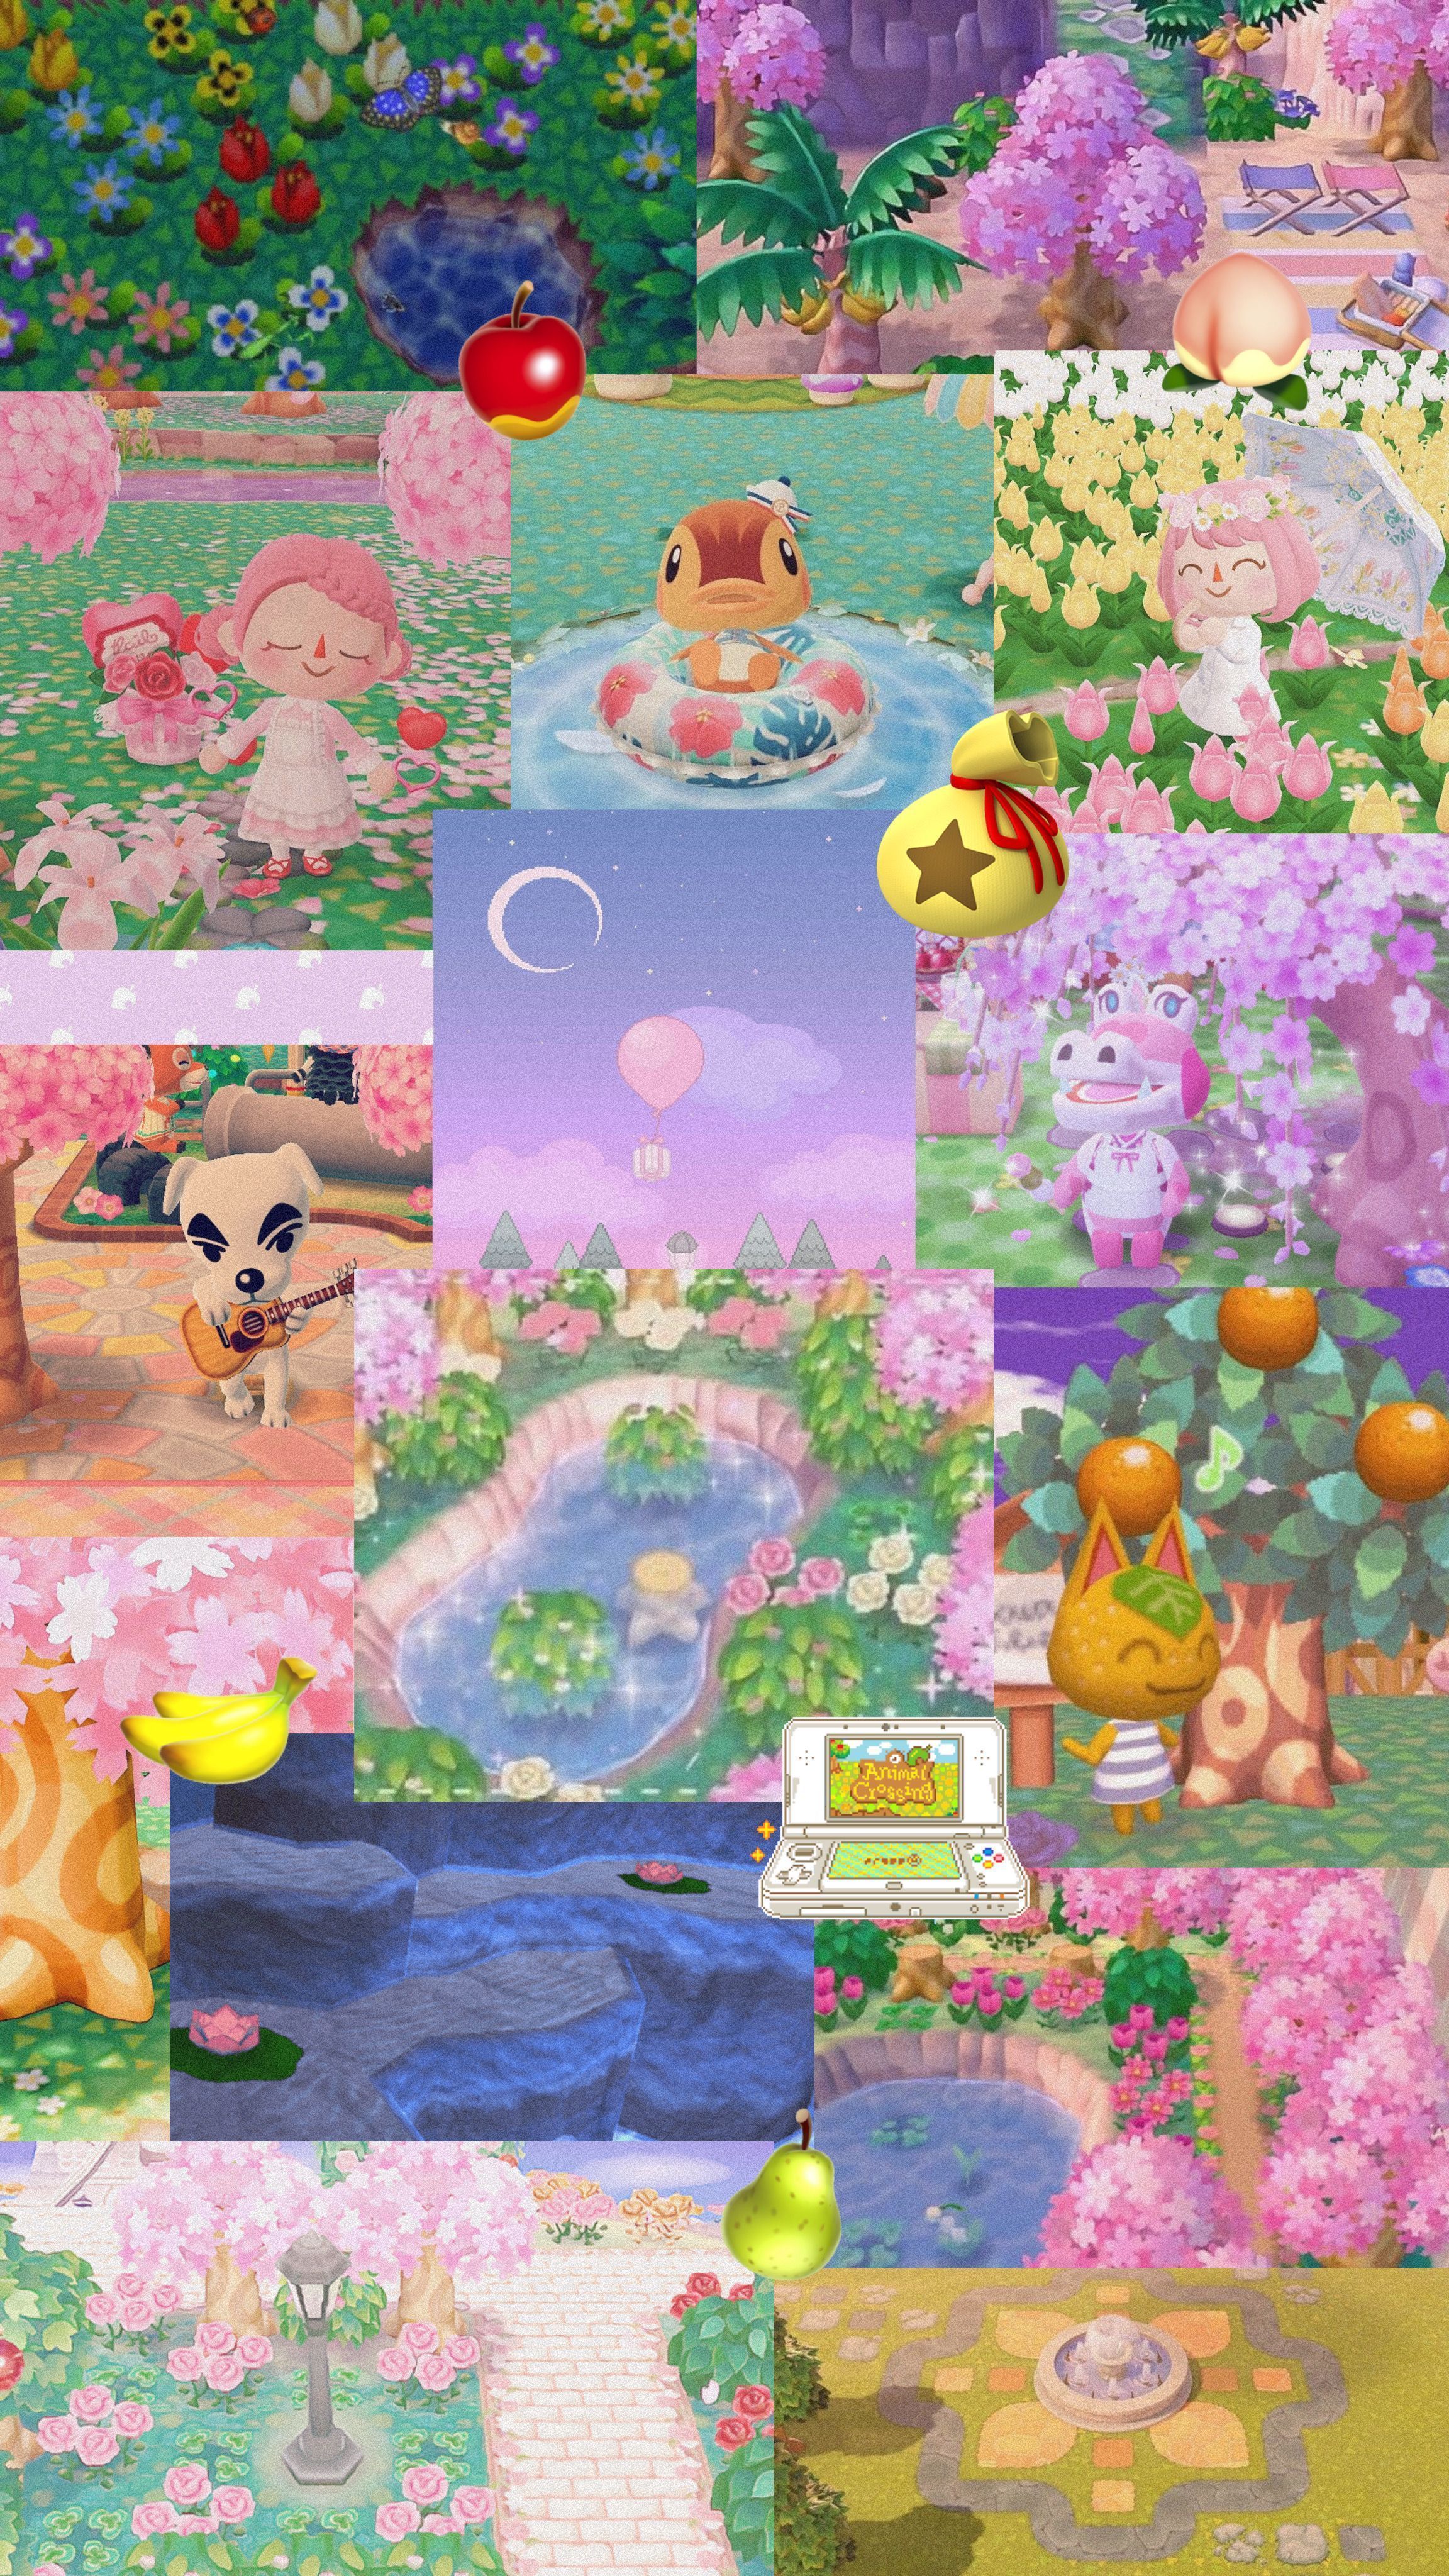 A collage of Animal Crossing screenshots including cherry blossom trees, a campfire, and a pond. - Animal Crossing